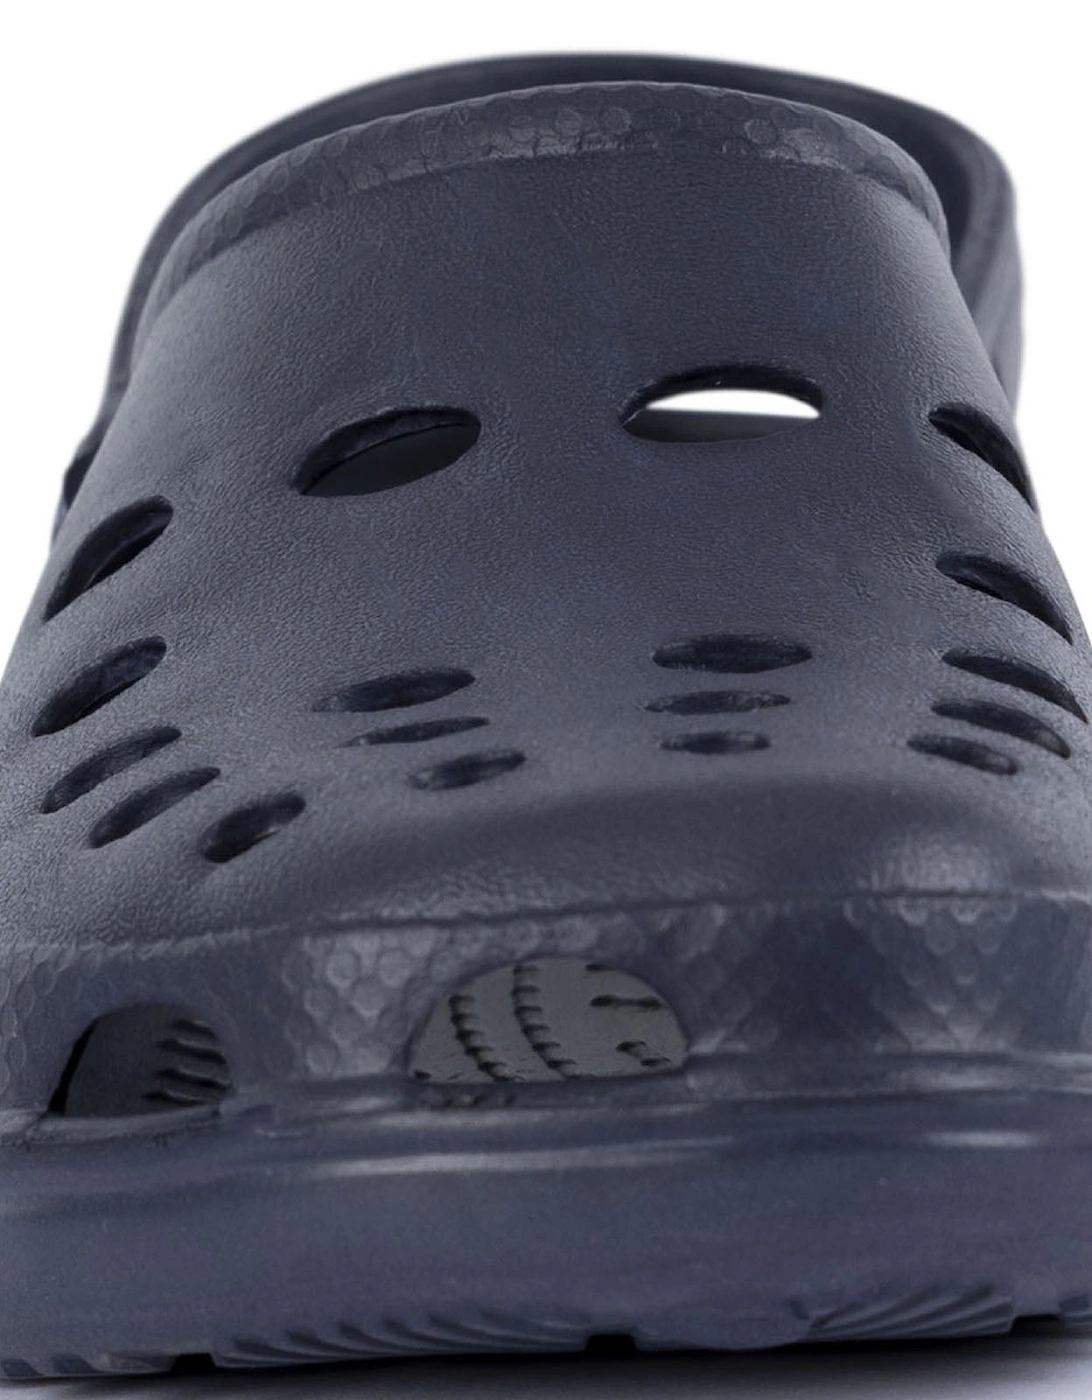 Adults Unisex Keele Moulded Slip On Water Shoes Sandal - Navy